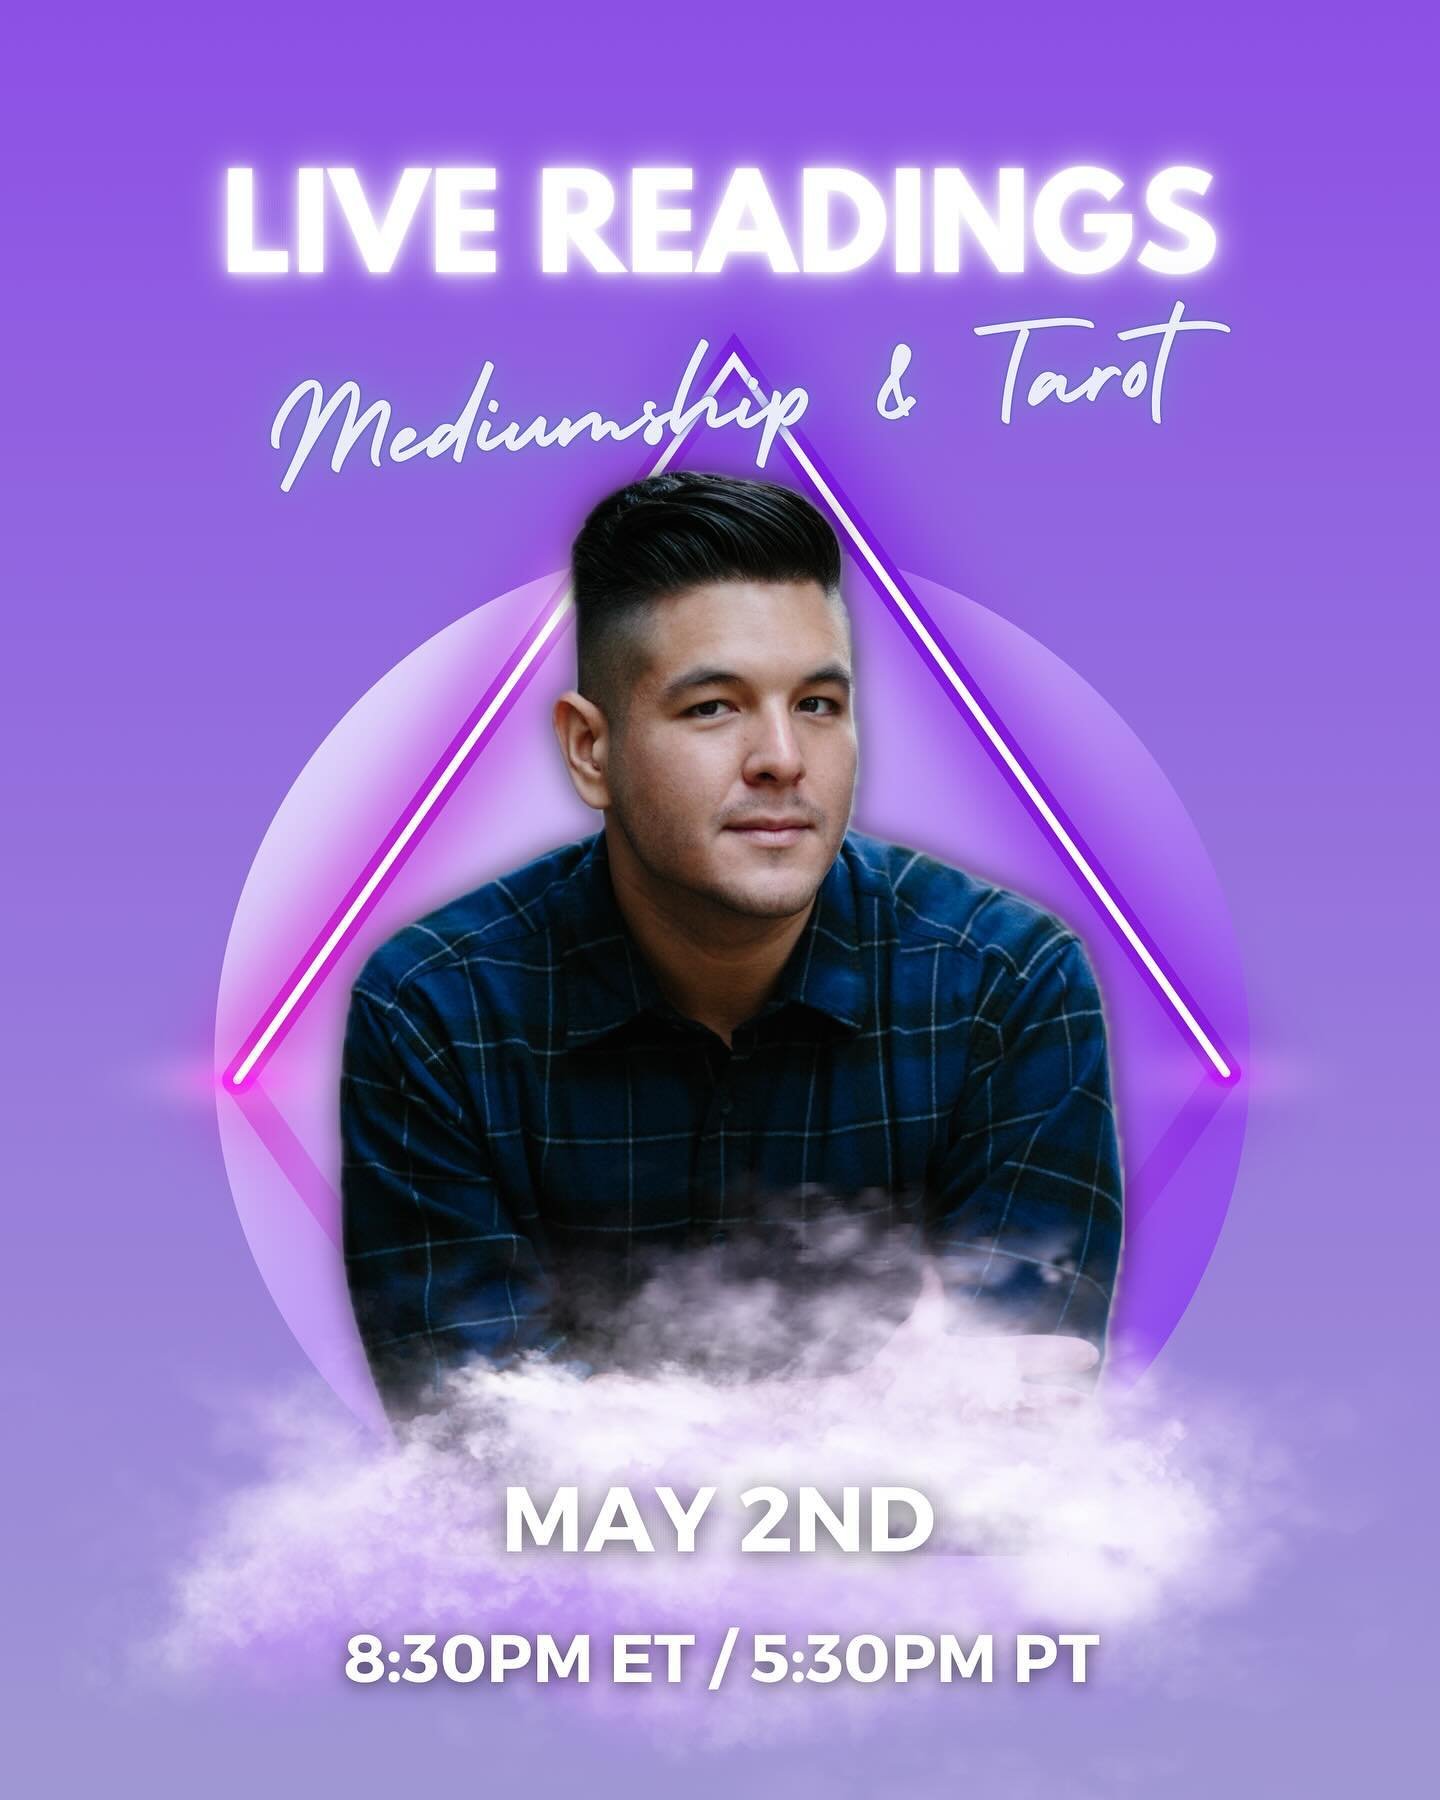 Aaand we&rsquo;re back! Going live for readings on Thursday! 🗓️✨